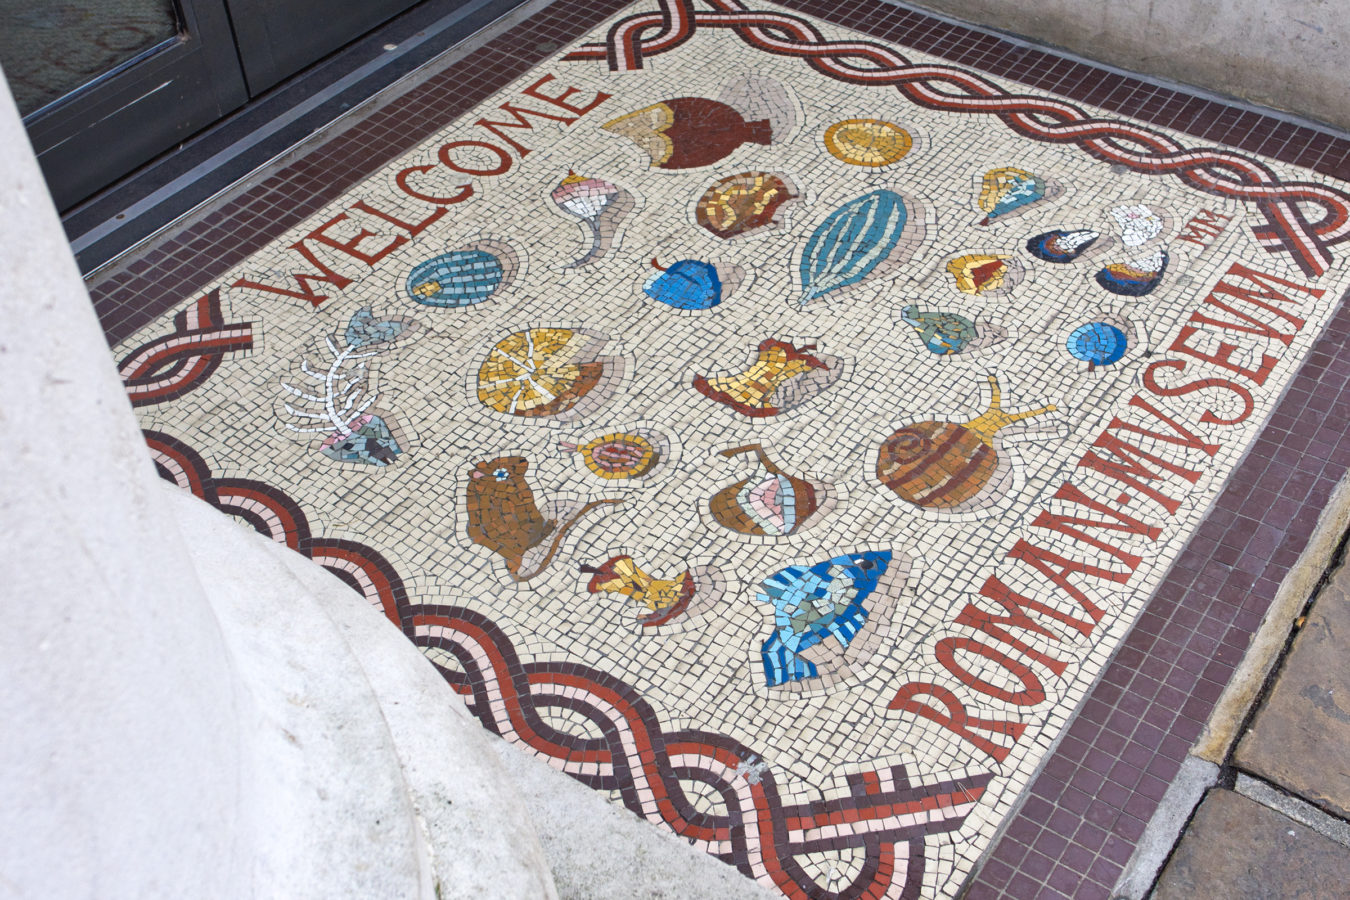 A mosaic replica outside the Roman Museum entrance stating 'Welcome Roman Museum'